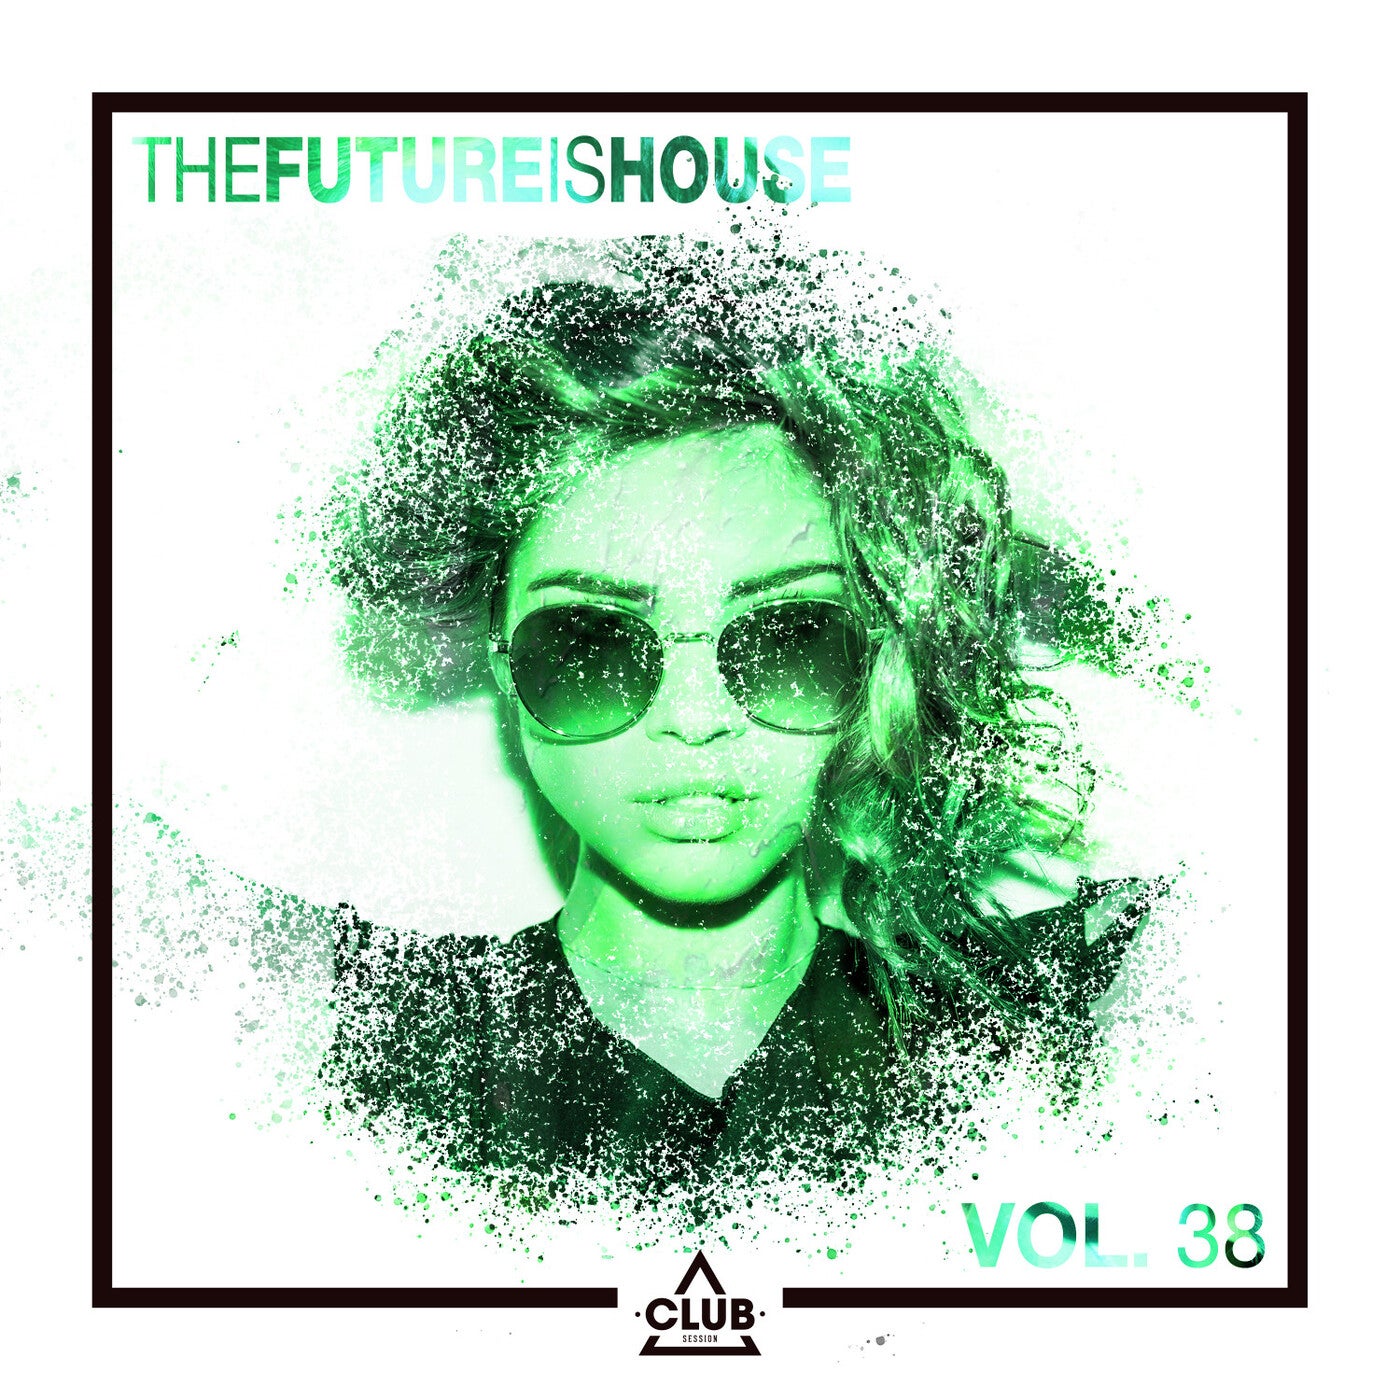 The Future is House, Vol. 38